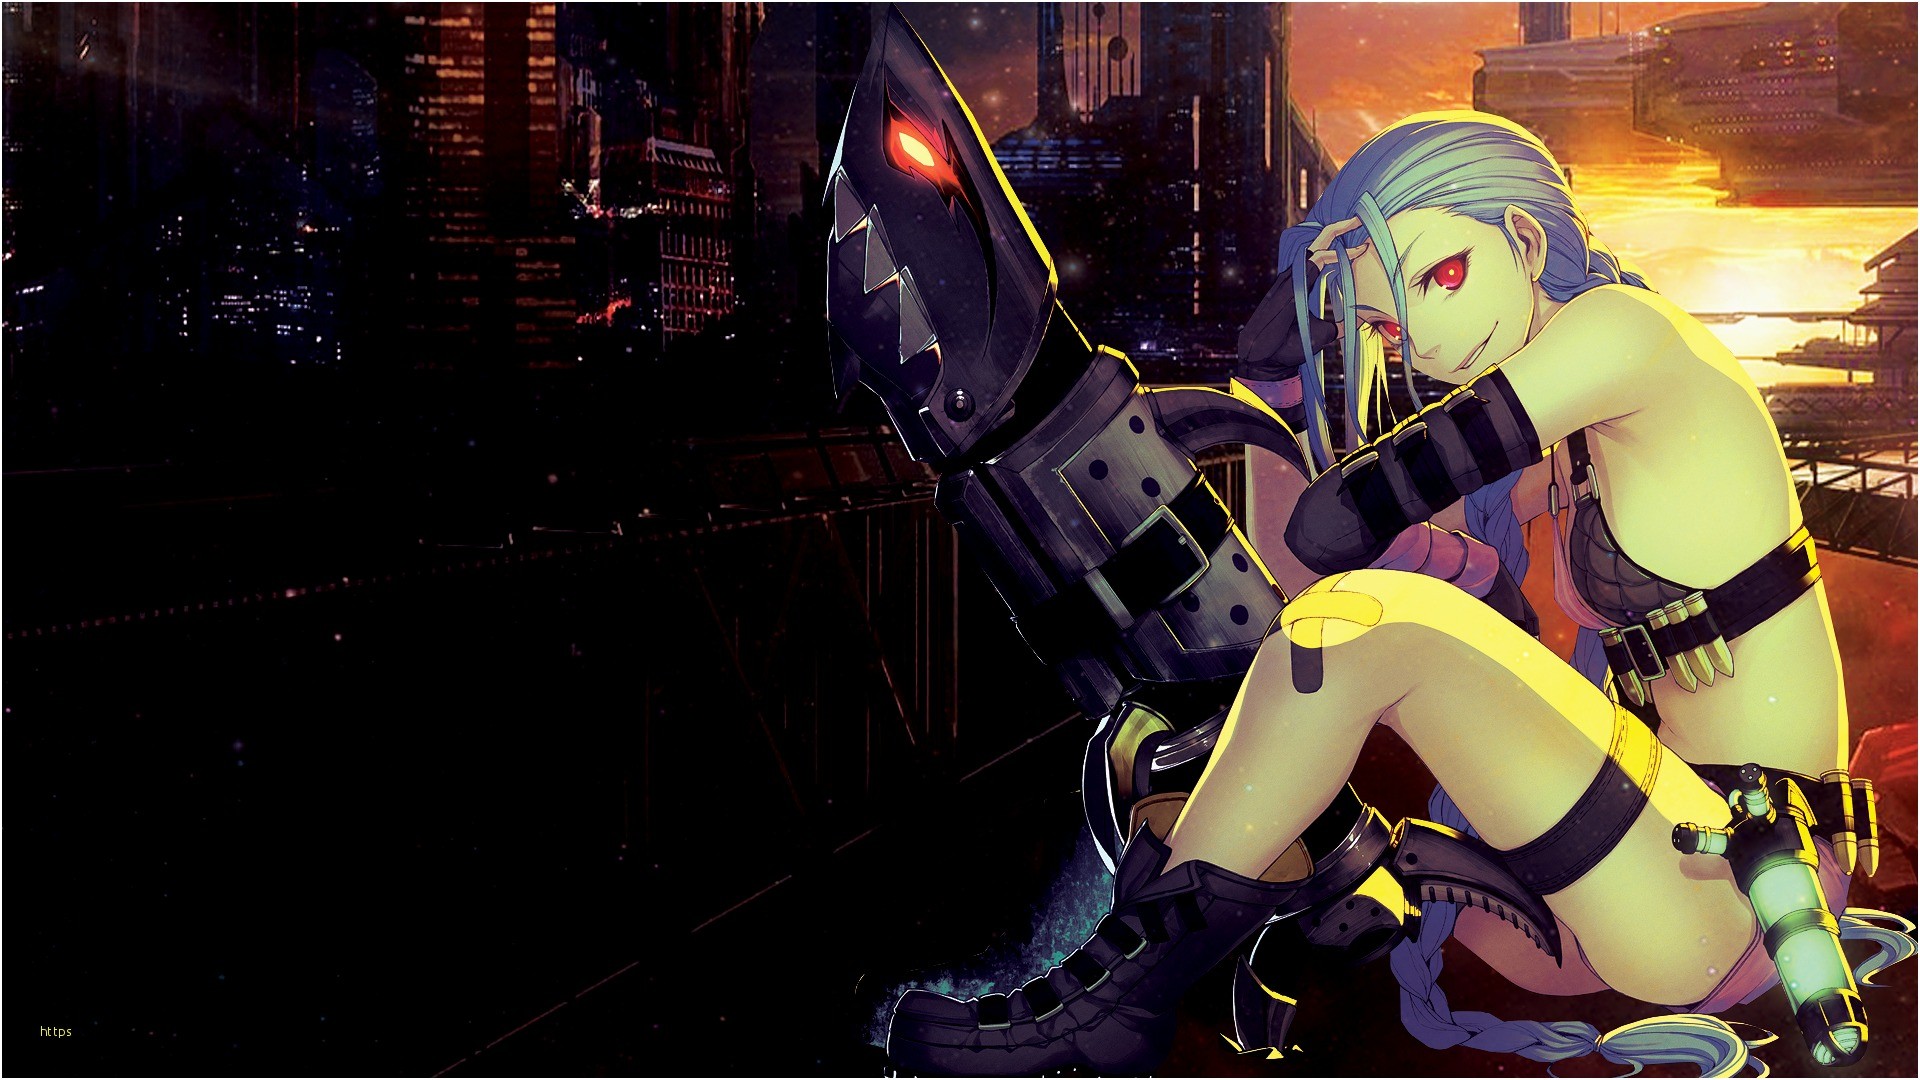 1920x1080 ... Jinx Wallpaper Awesome Top 20 Jinx Adc Wallpapers My Free Wallpapers  Hub ...